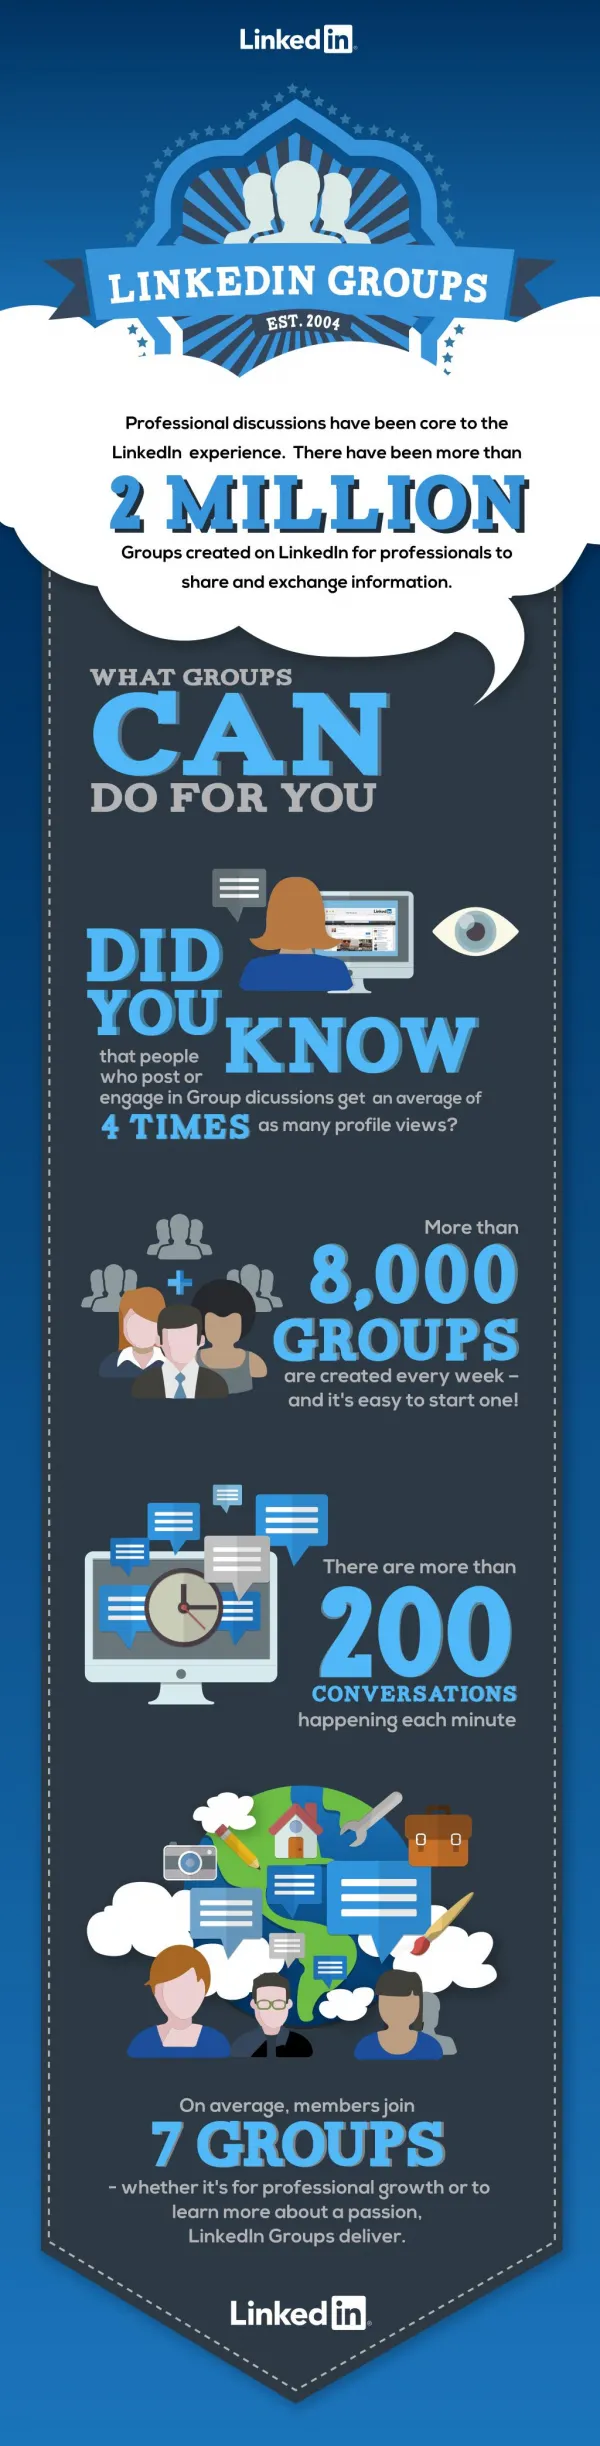 Why you should be engaging with groups on LinkedIn